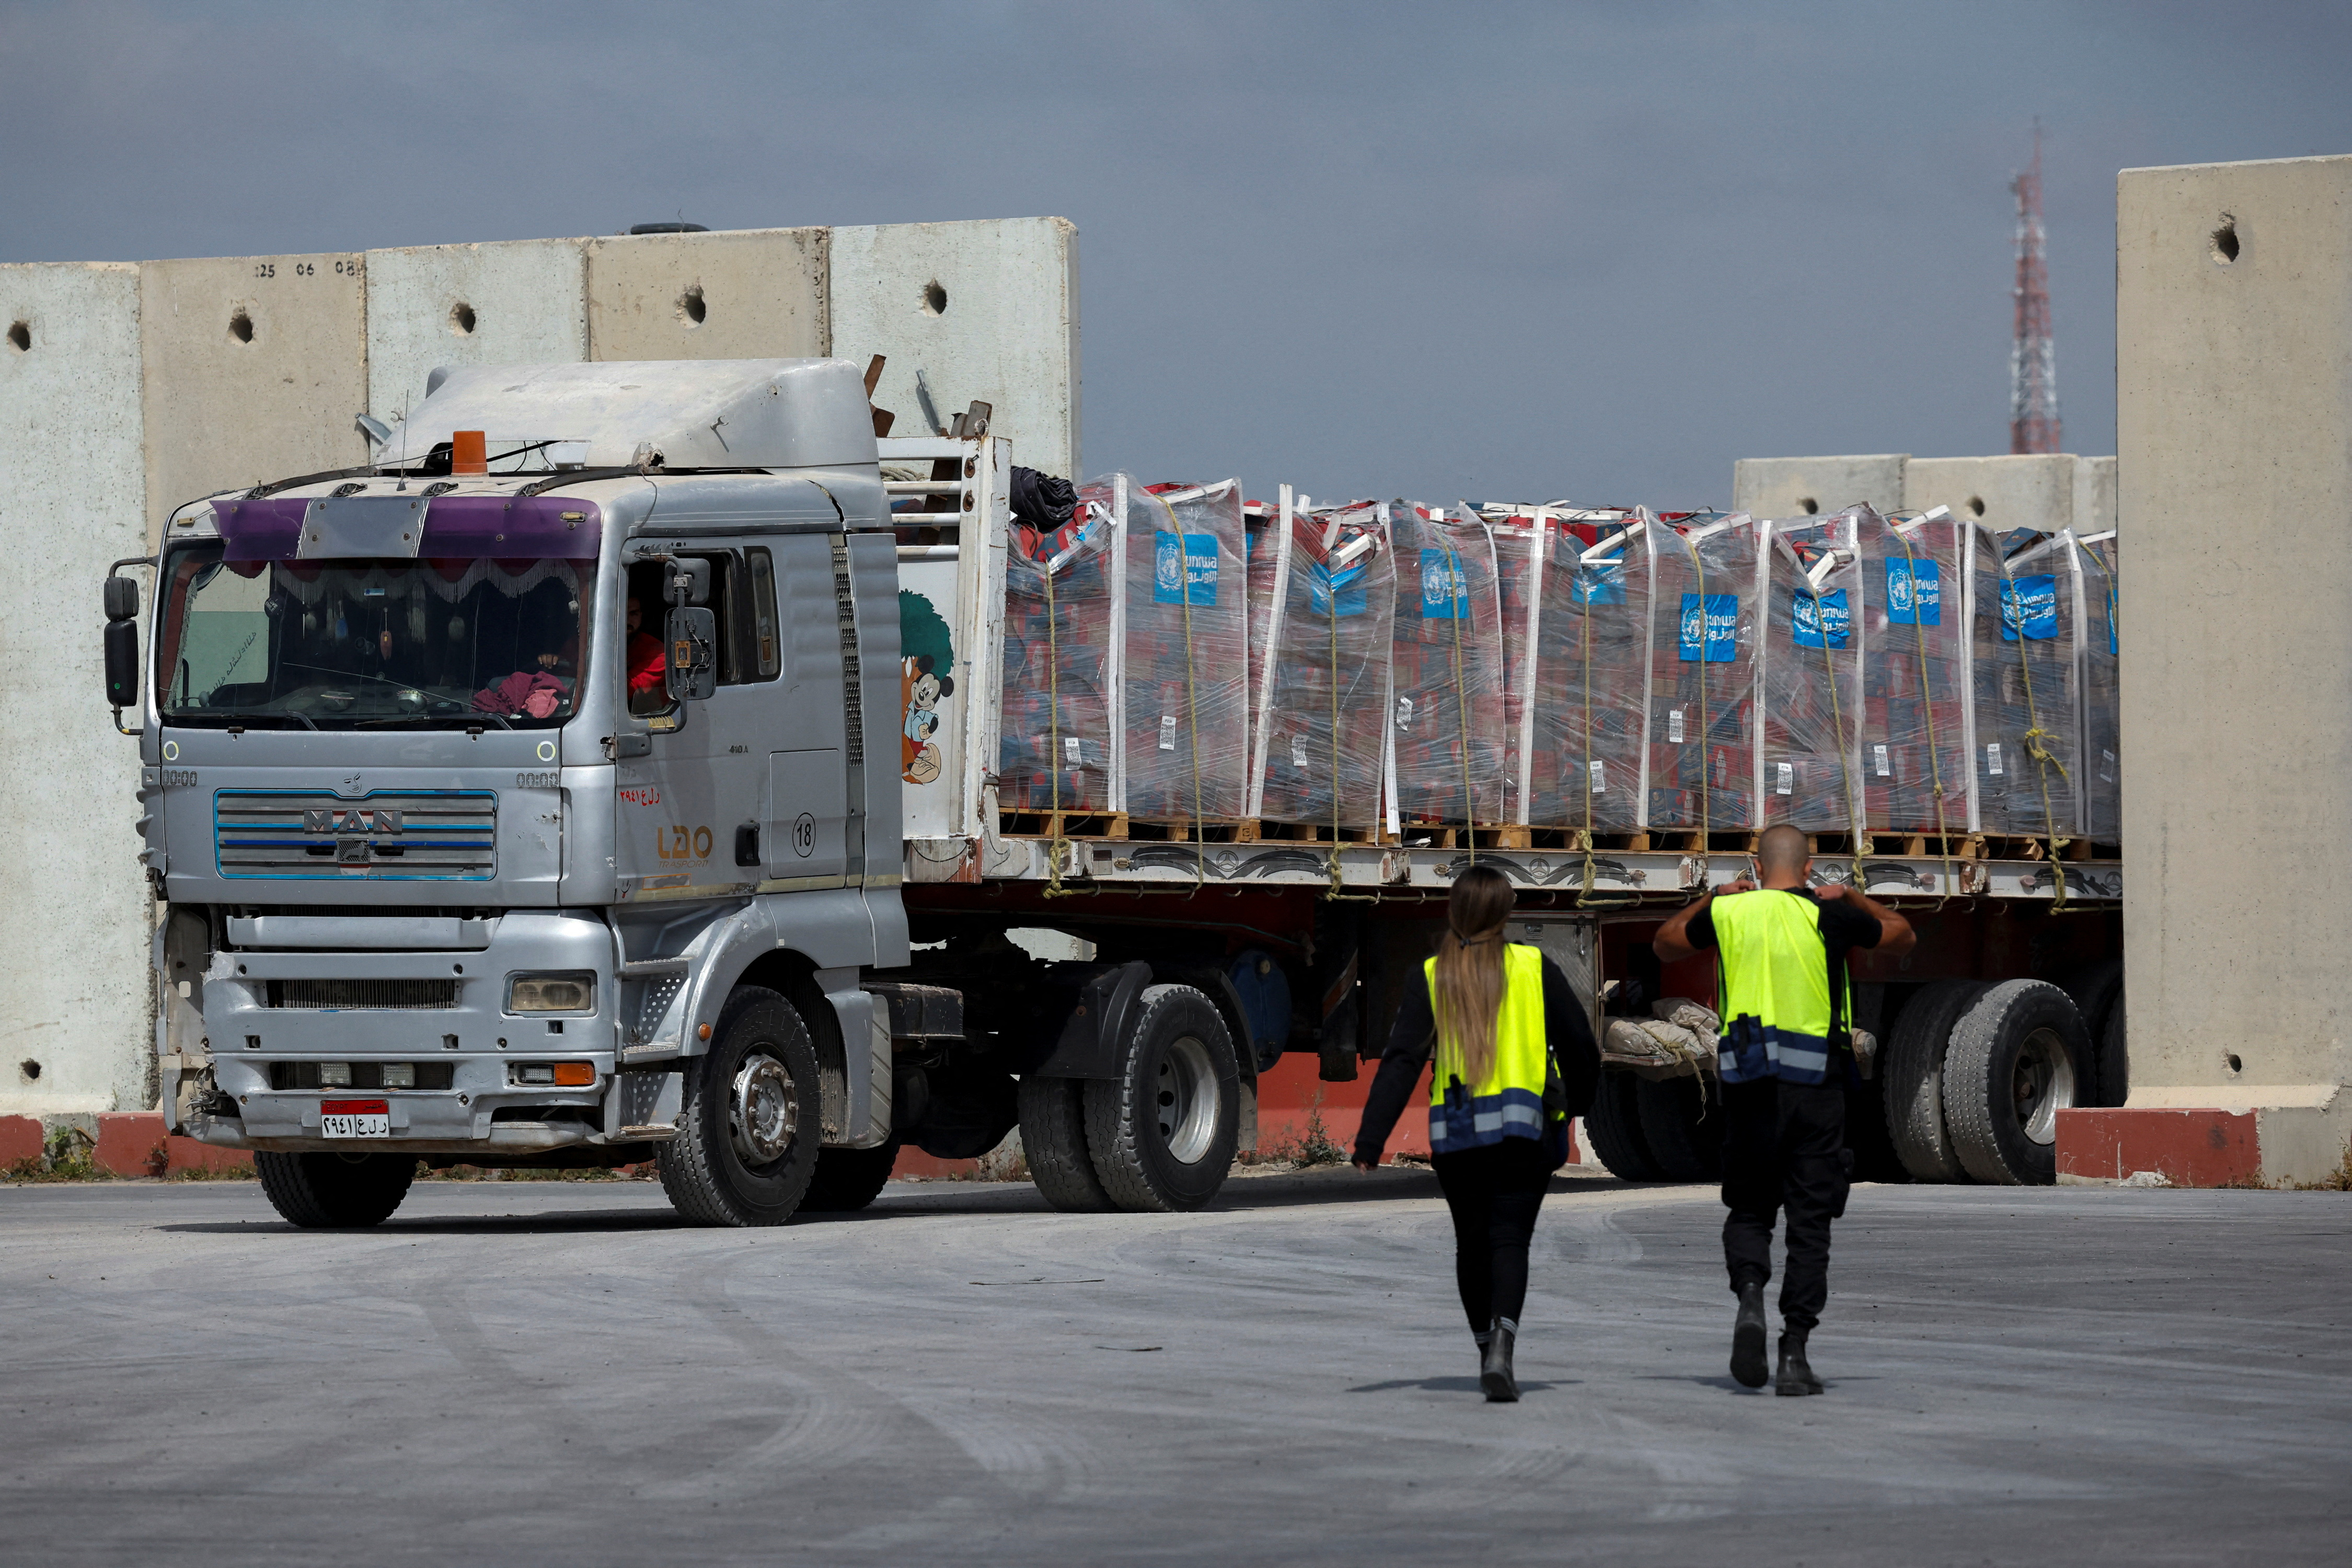 A truck carrying humanitarian aid bound for the Gaza Strip drives at the inspection area at the Kerem Shalom crossing